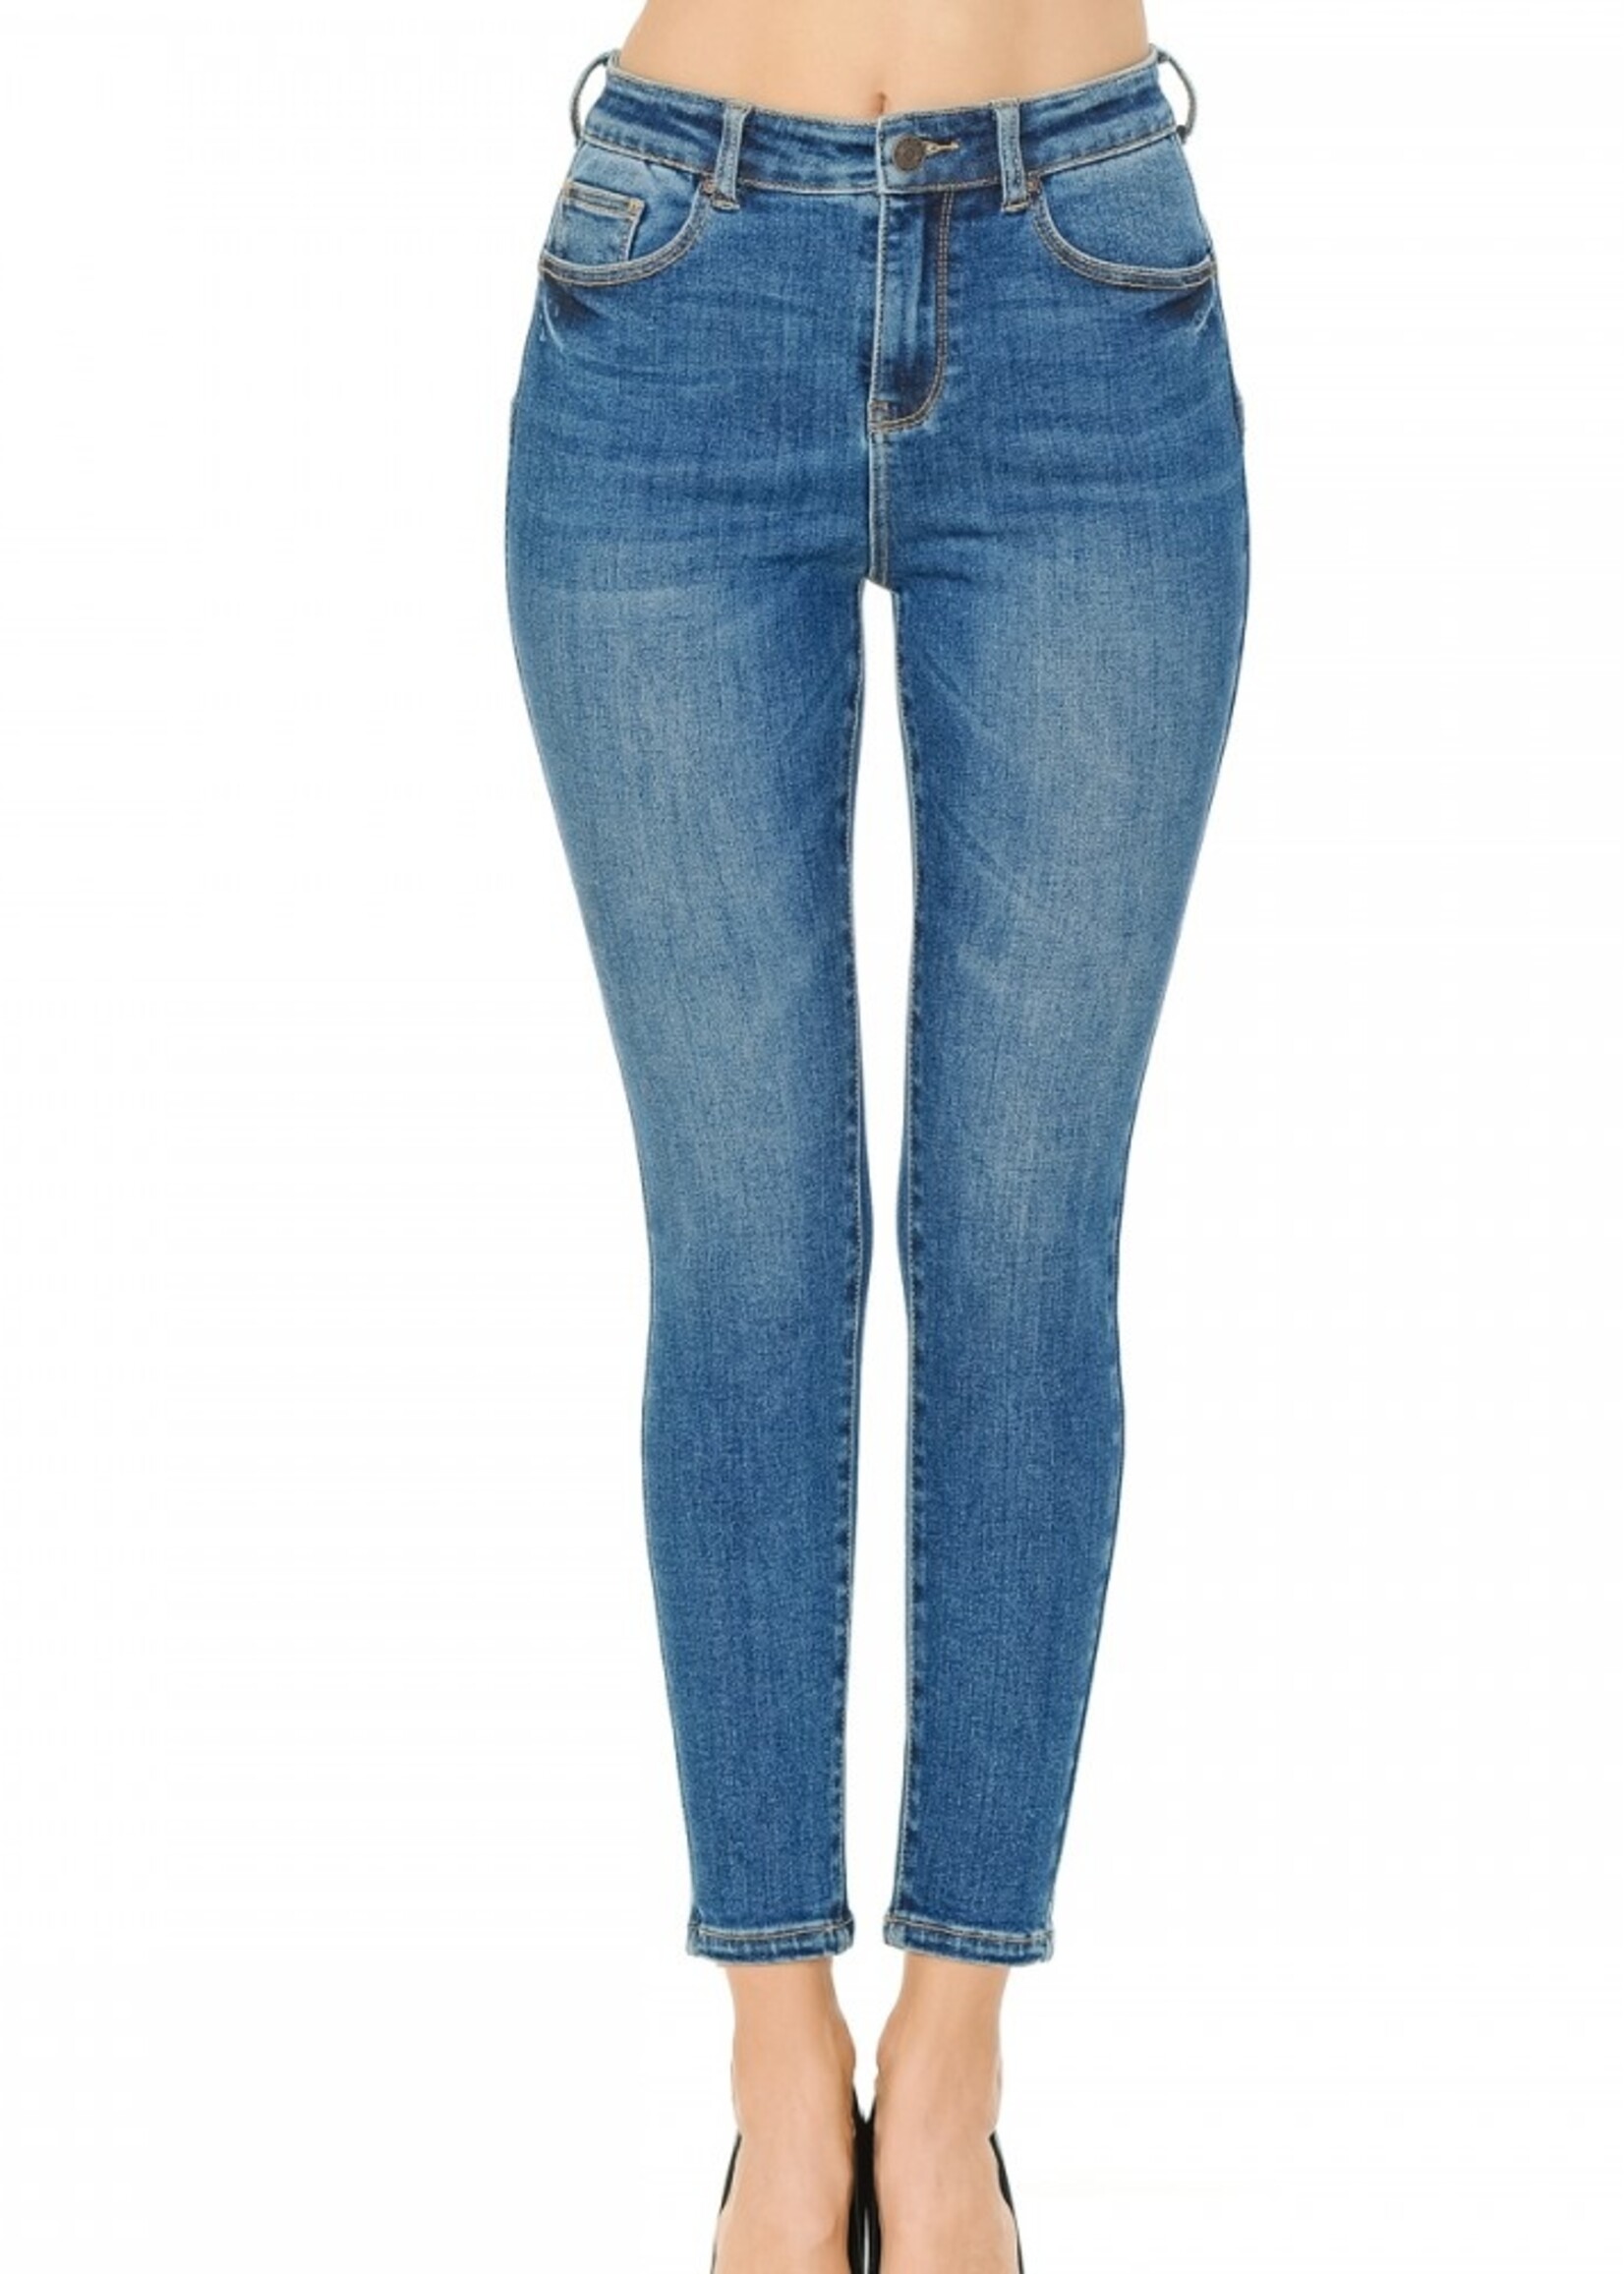 Women High Rise Push Up Jeans - 90800 - Oly's Home Fashion